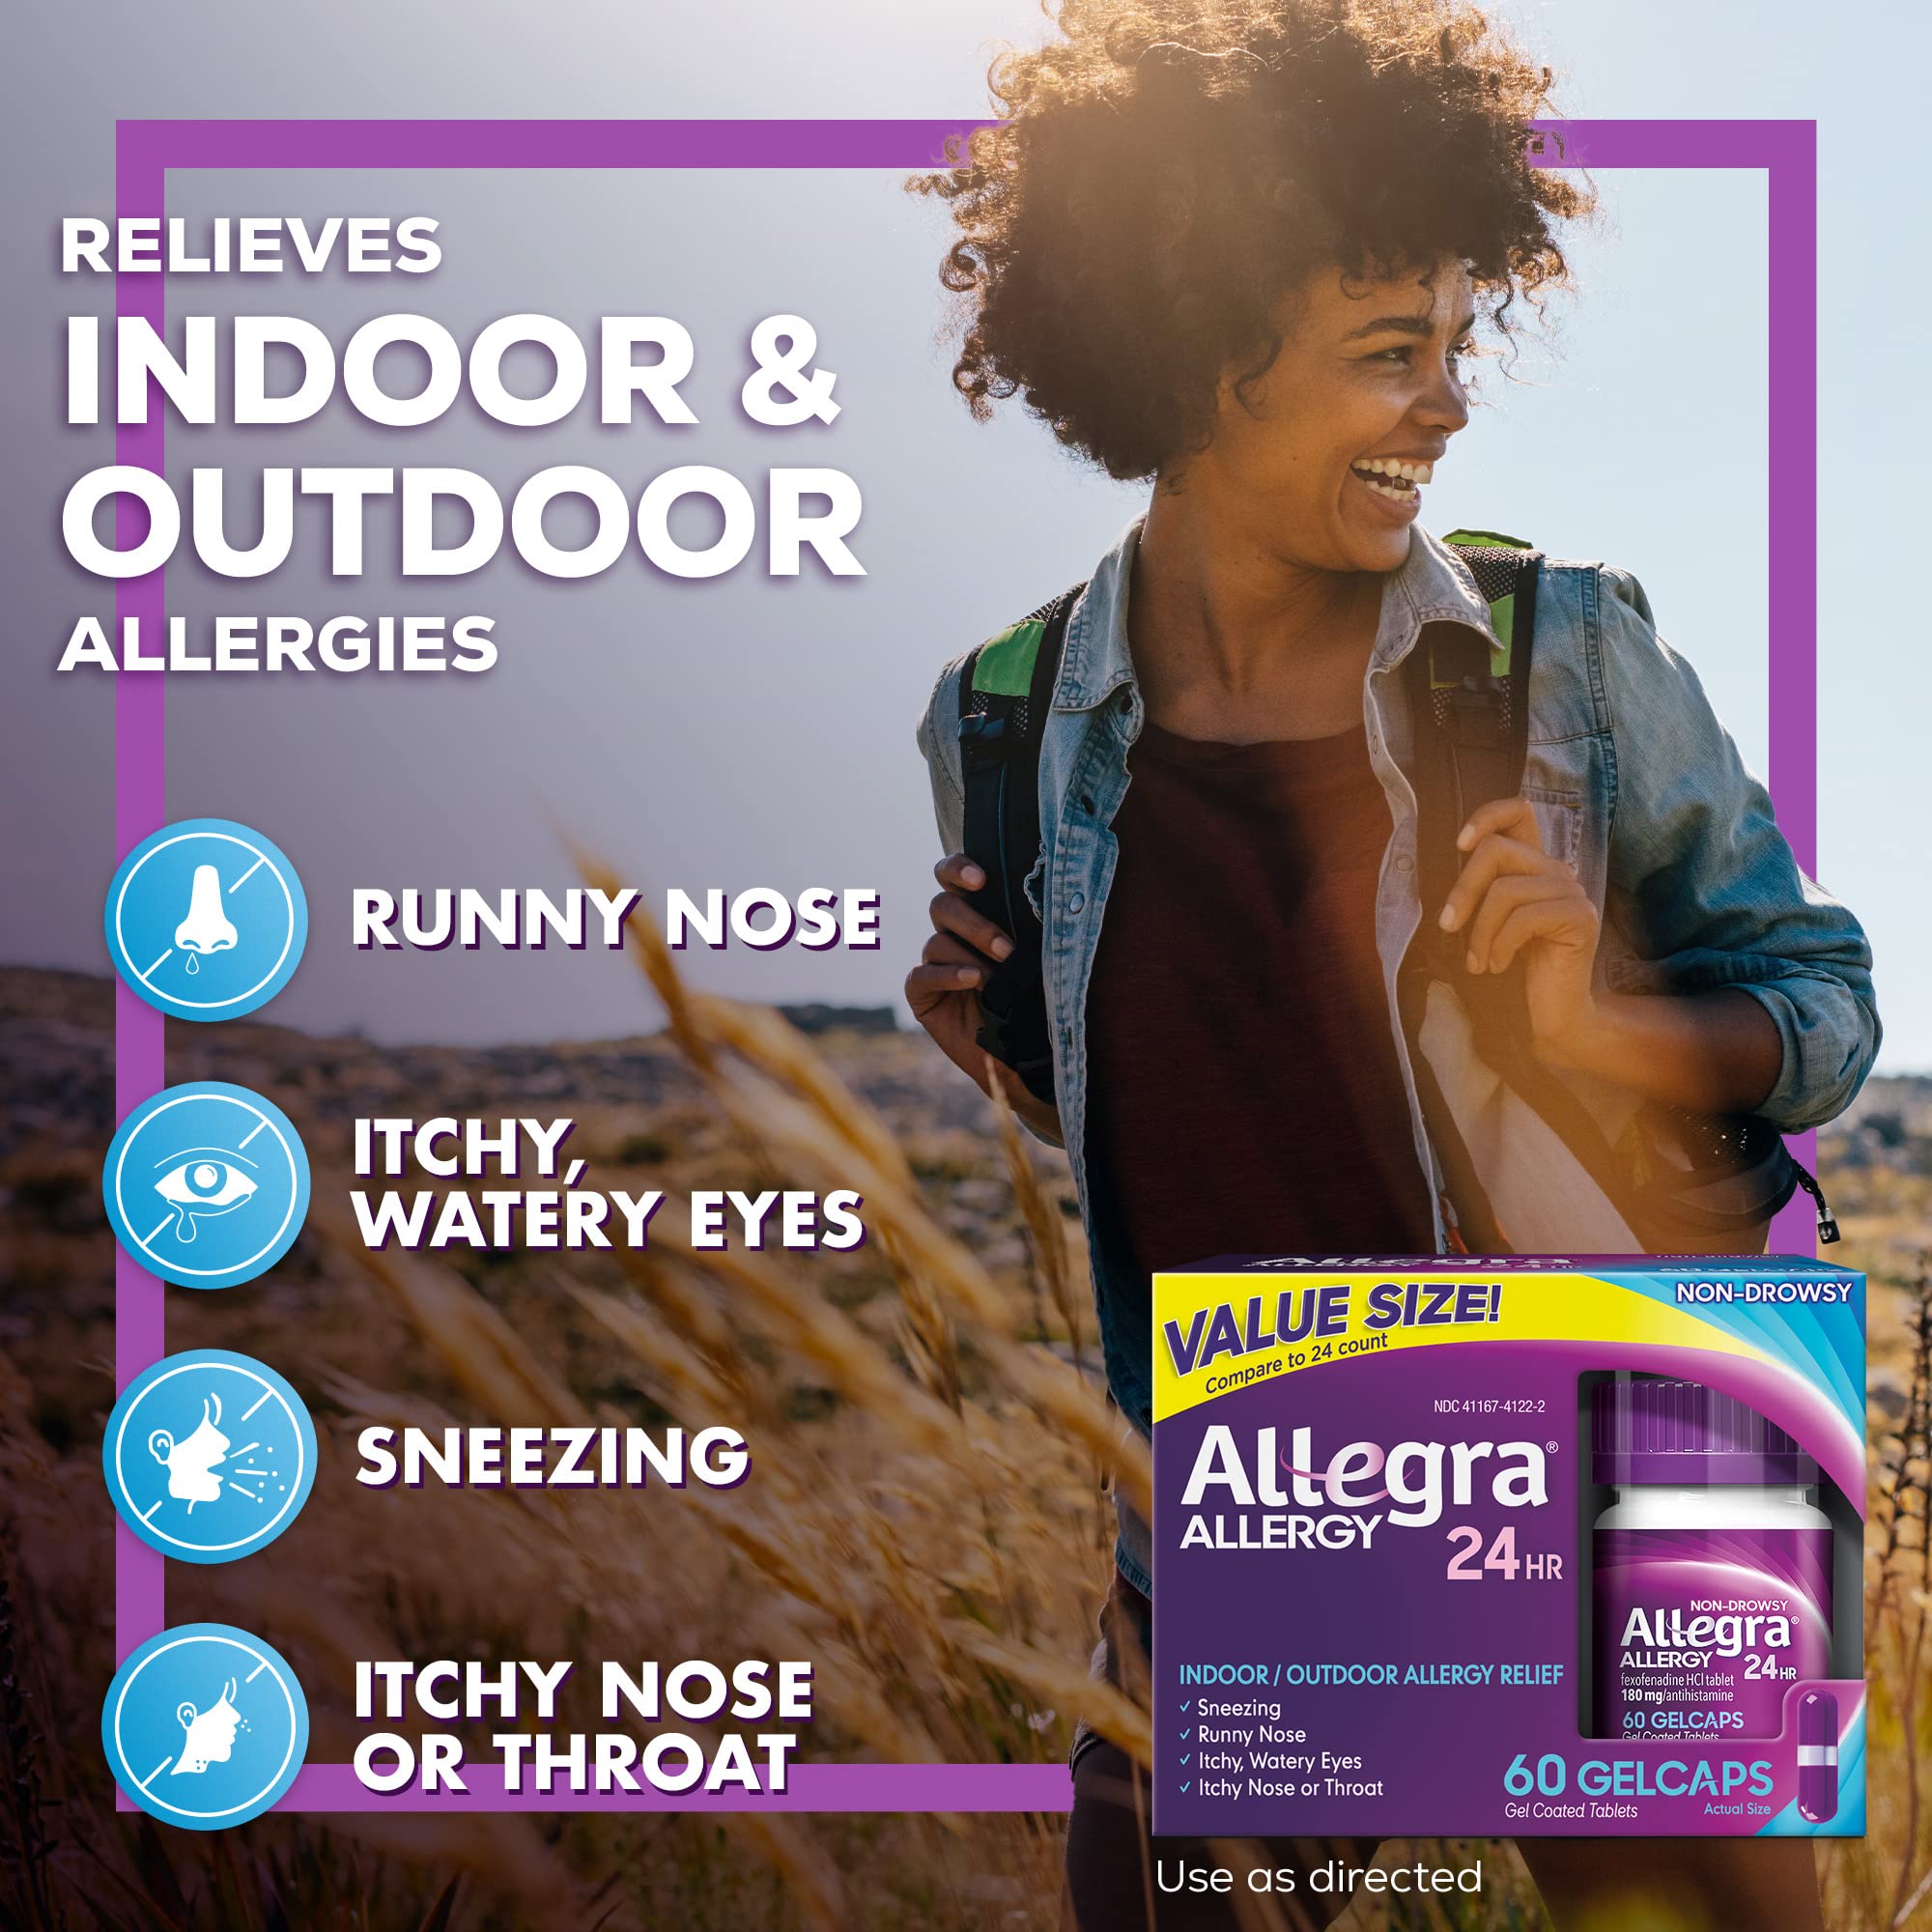 Allegra Adult 24HR Non-Drowsy Antihistamine Gelcaps, 60-Count, Fast-acting Allergy Symptom Relief, 180 mg